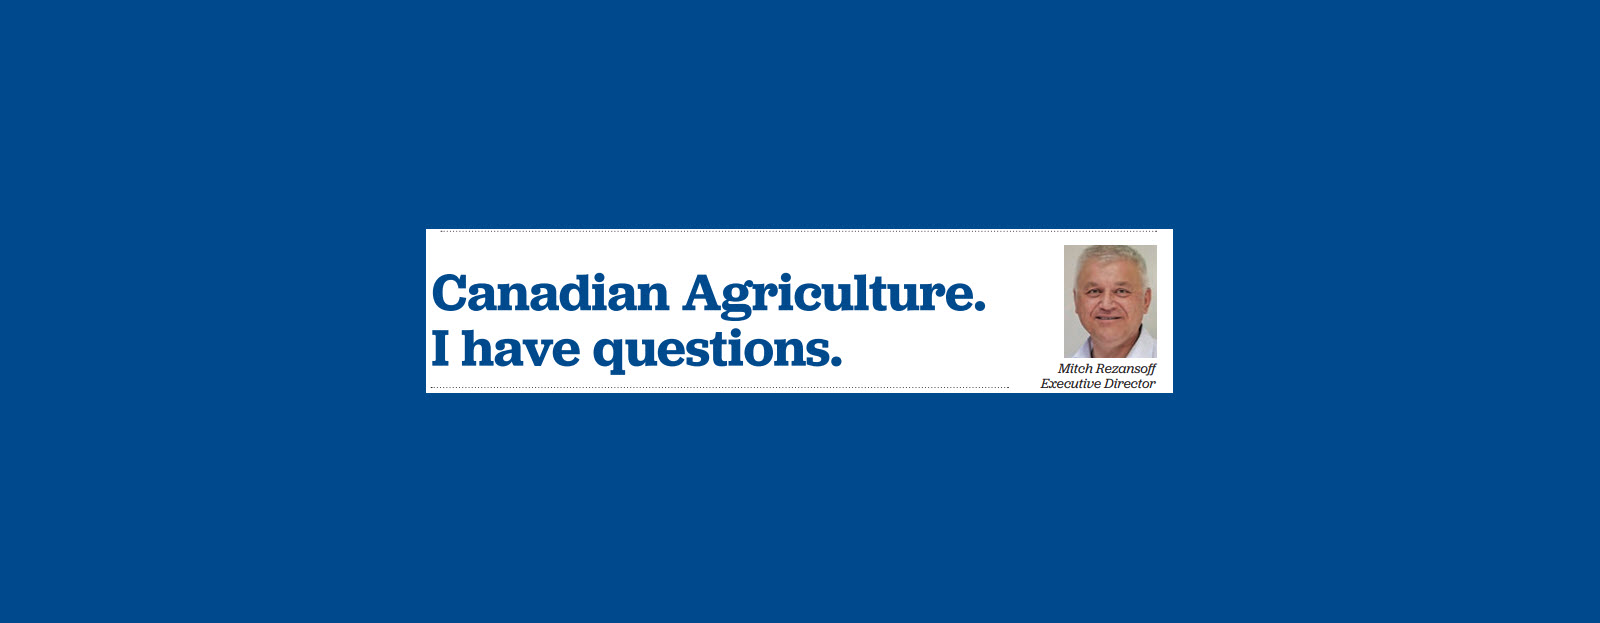 Banner for Canadian Agriculture Questions